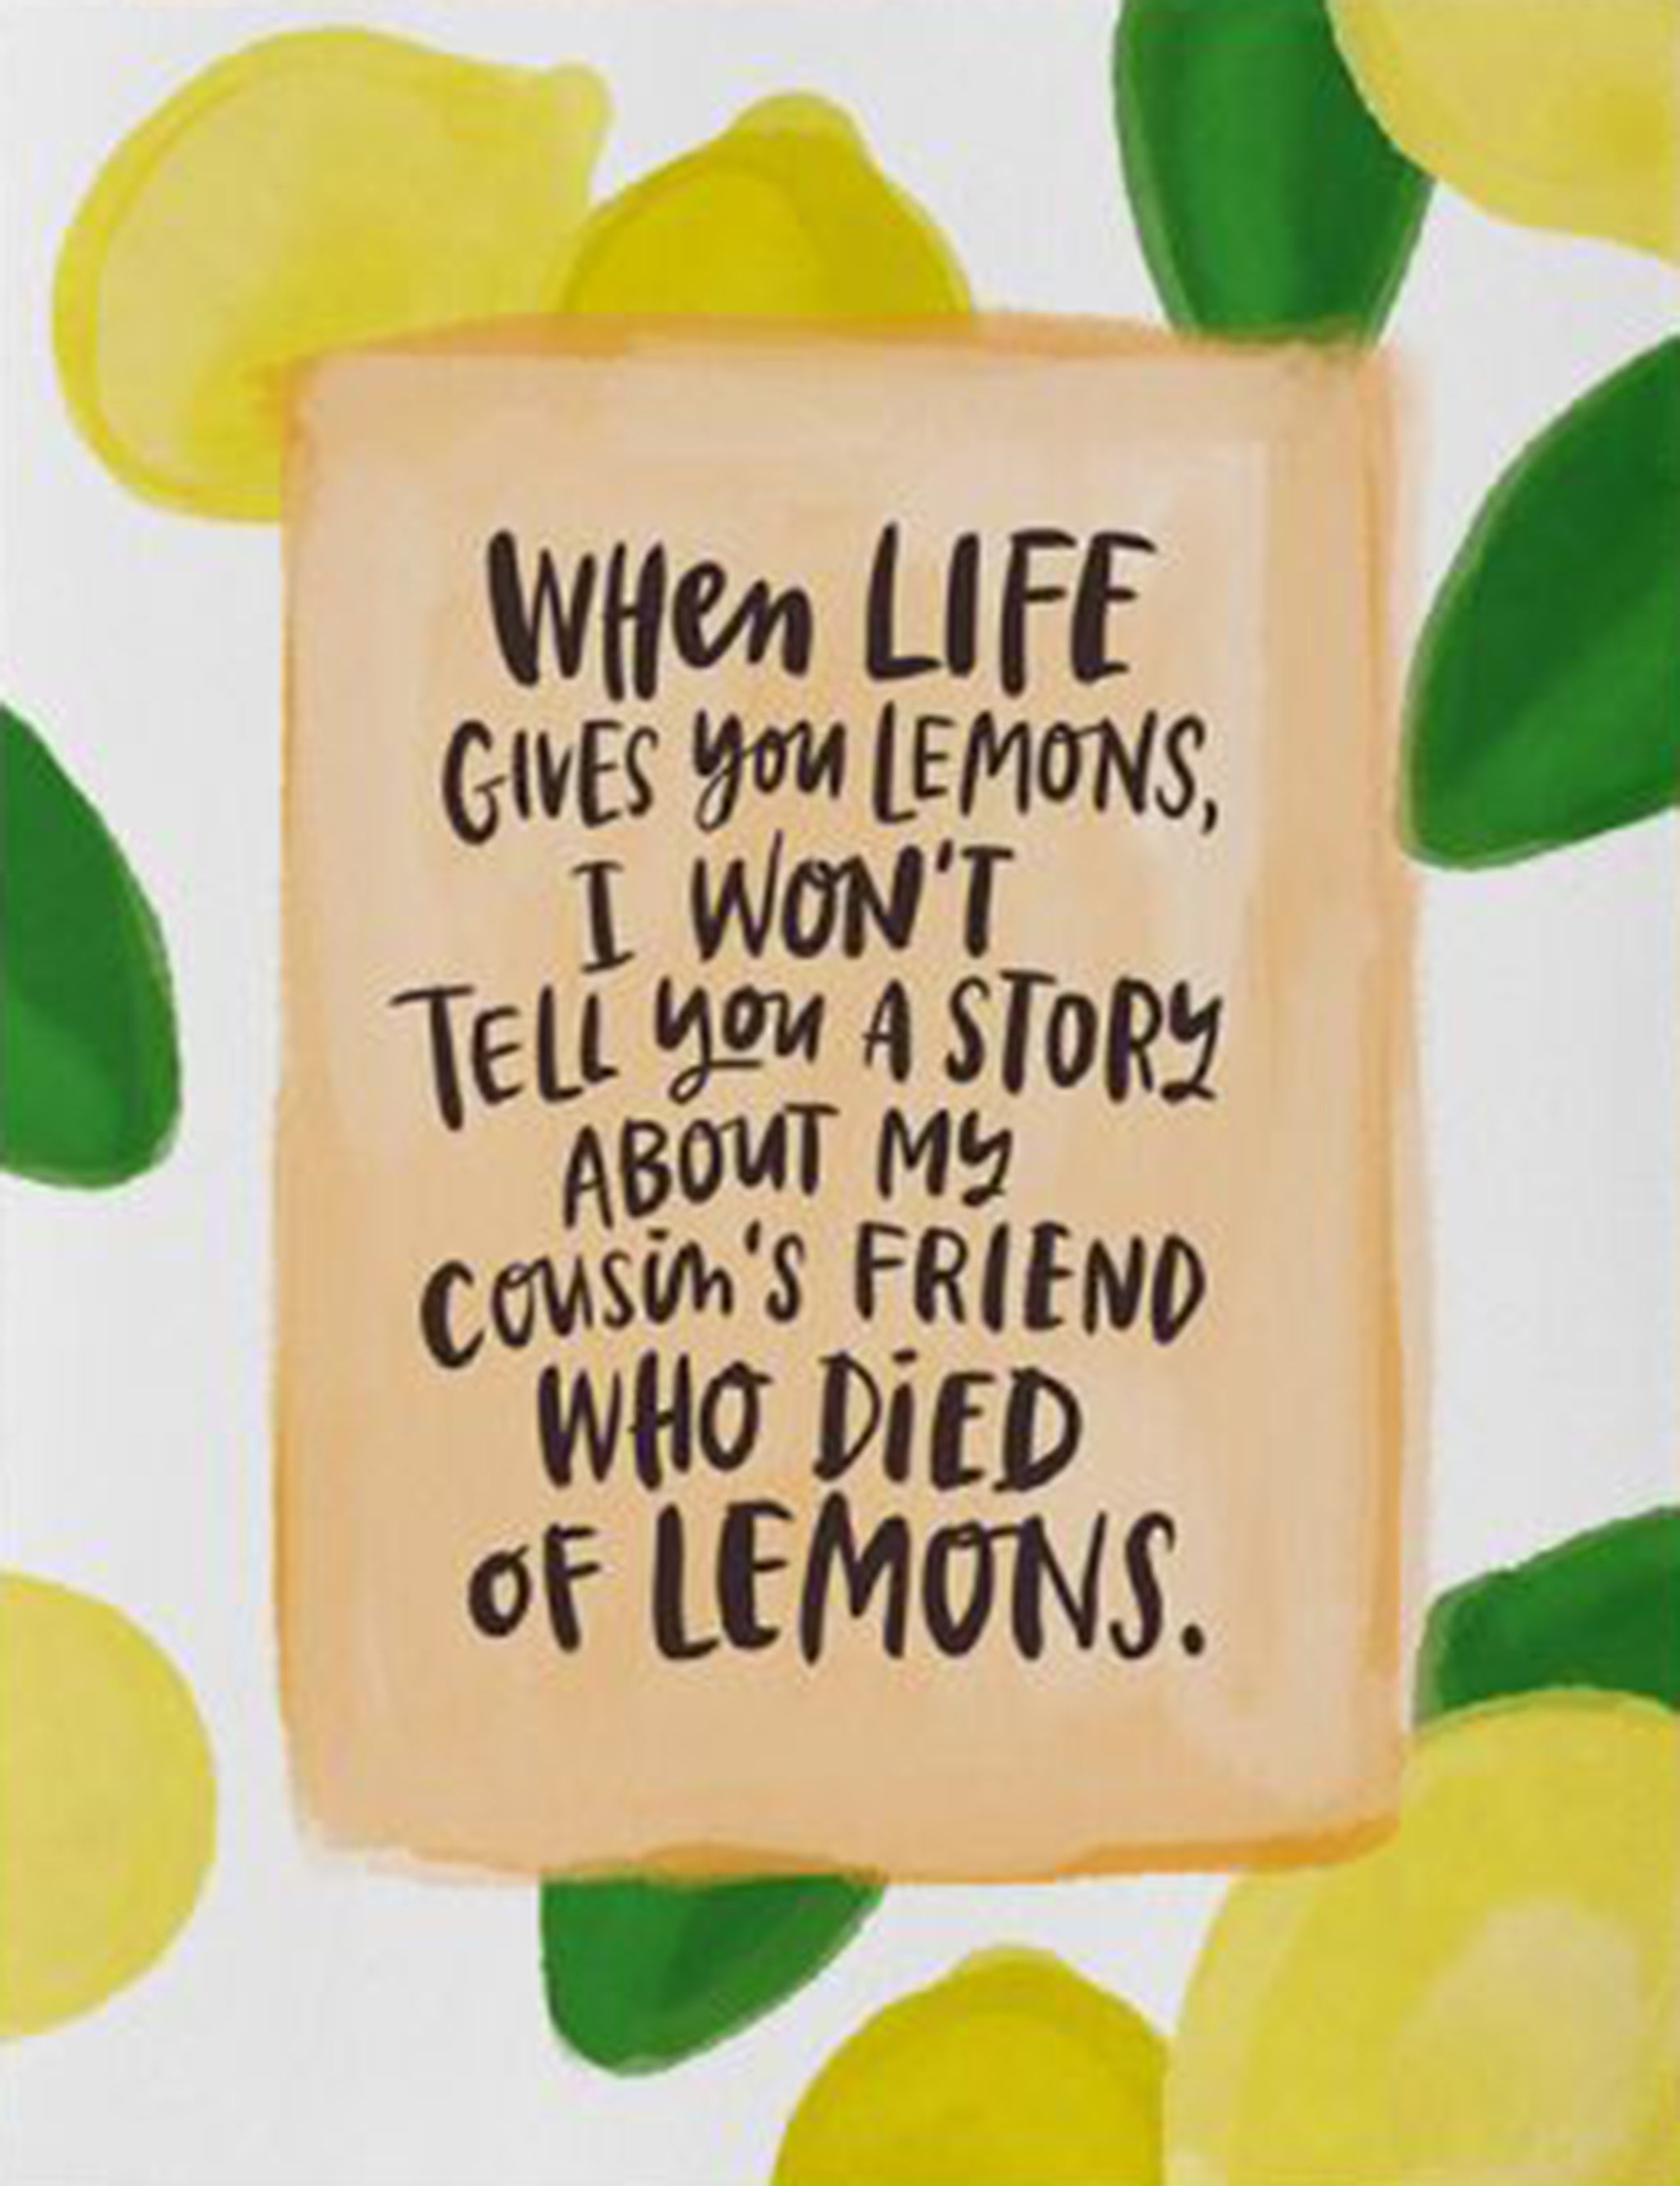 Emily McDowell Card that reads: "When life gives you lemons I won't tell you a story about my cousin's friend who died of lemons"